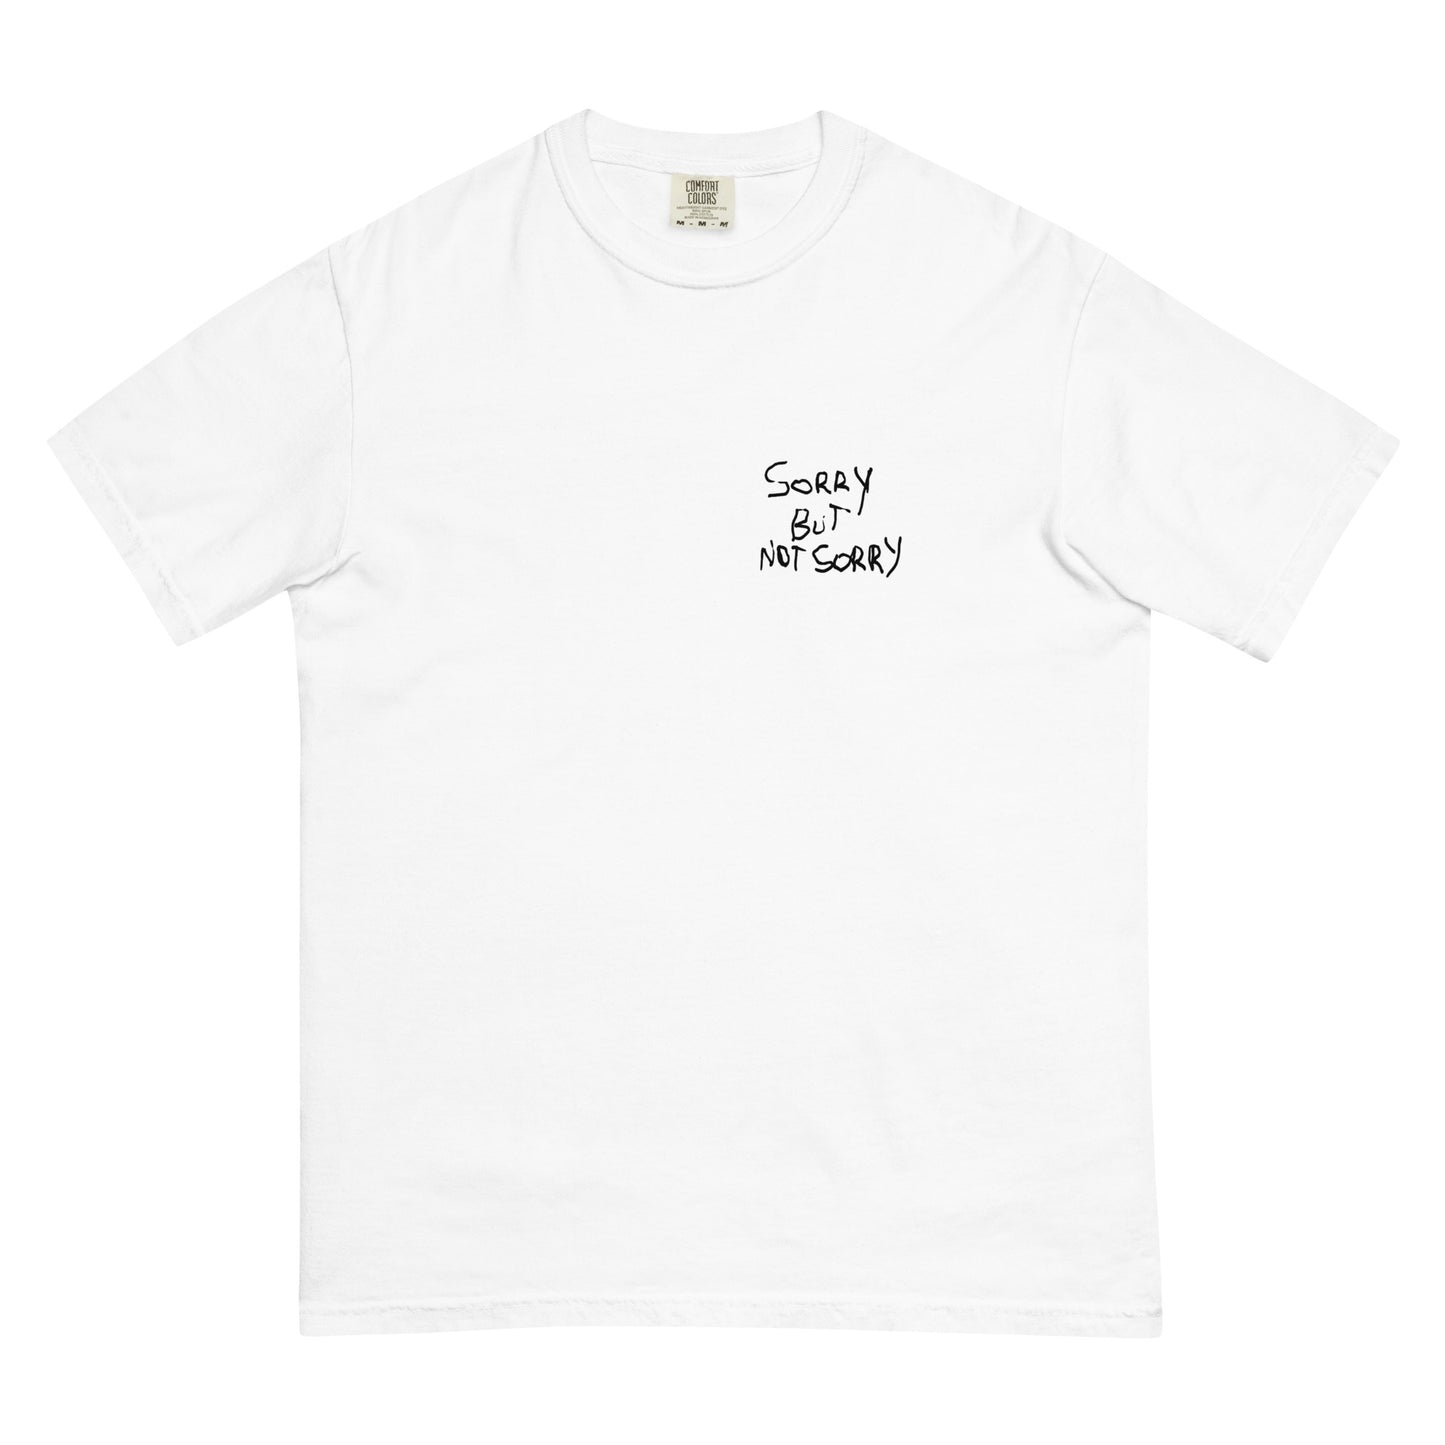 SoRrY BuT NoT SoRrY Limted  t-shirt